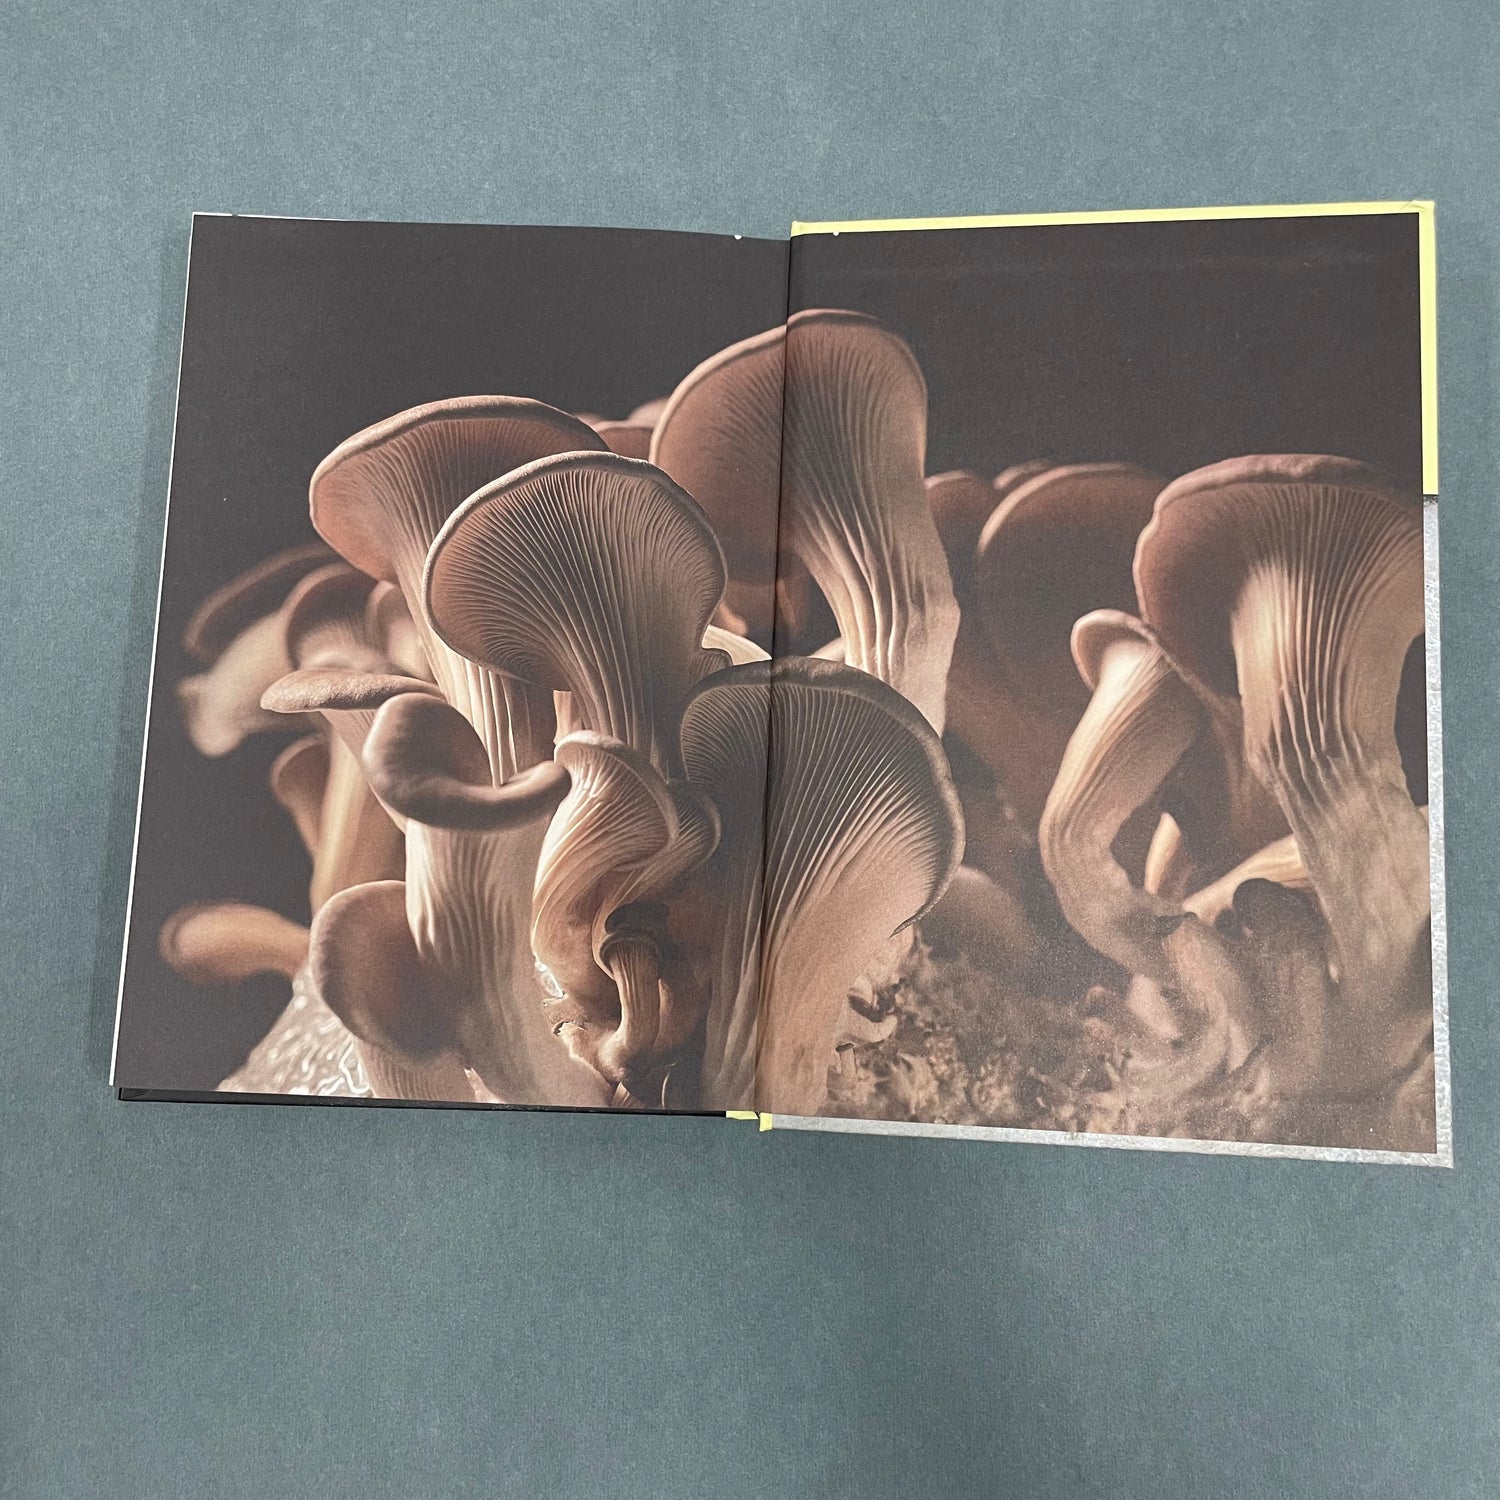 Mushrooms: Over 70 Recipes Which Celebrate Mushrooms by Martin Nordin